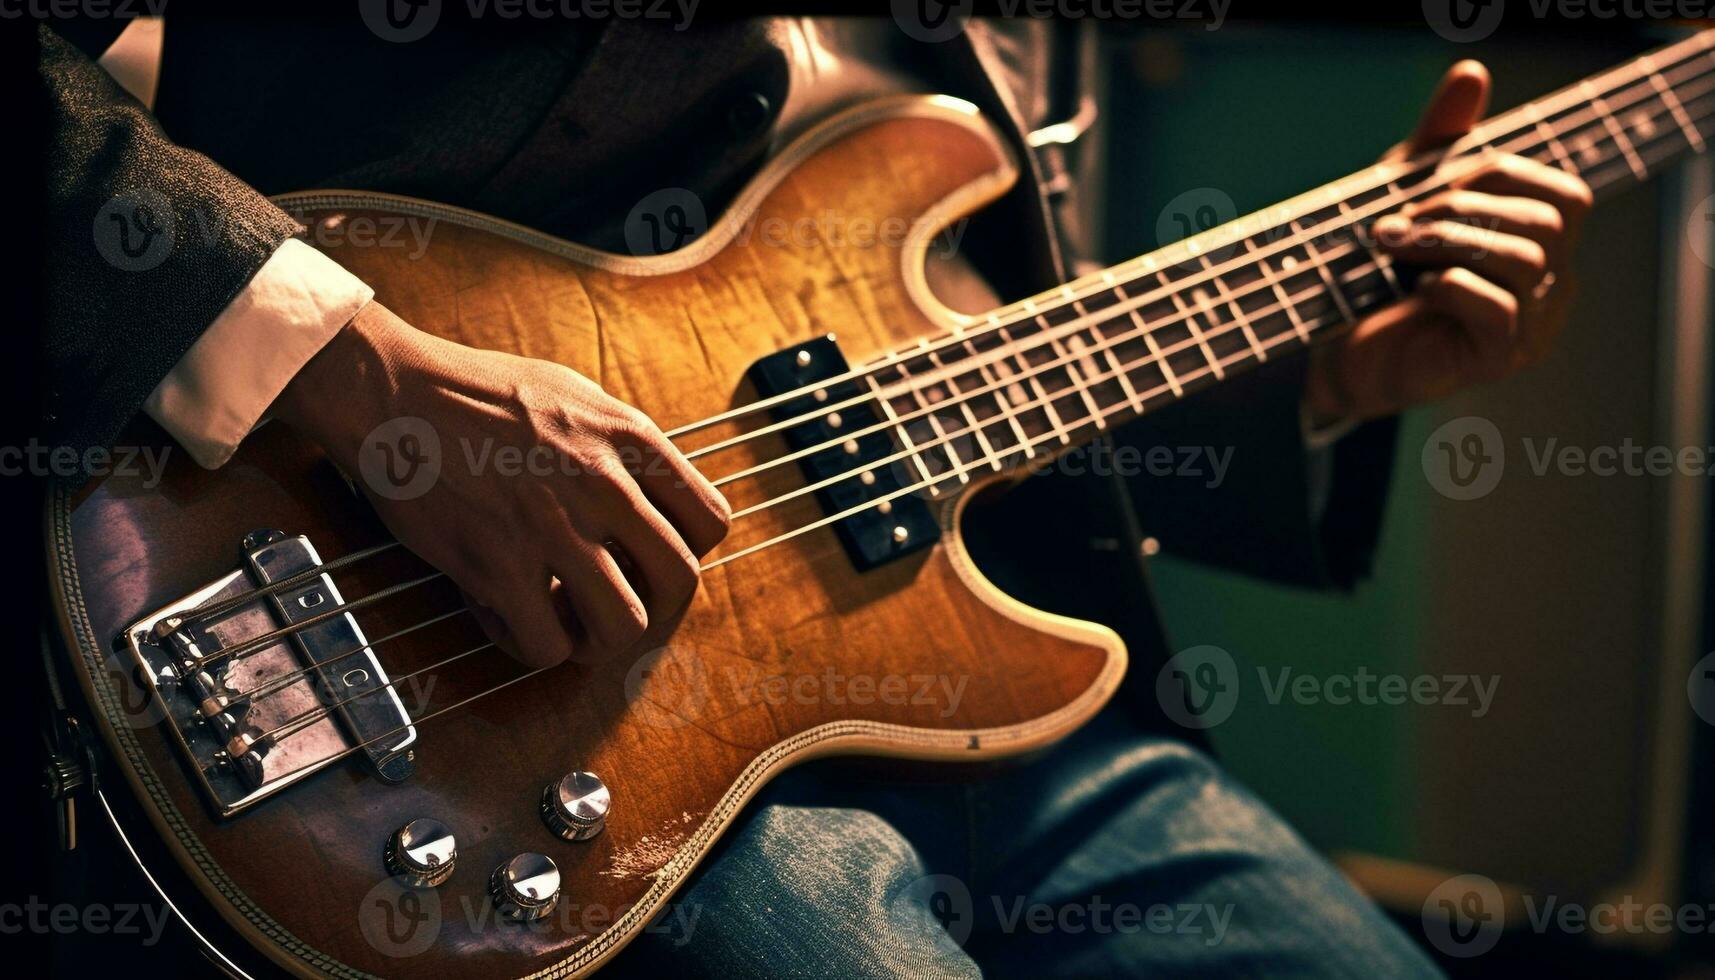 The guitarist skilled fingers pluck the strings of his guitar generated by AI photo